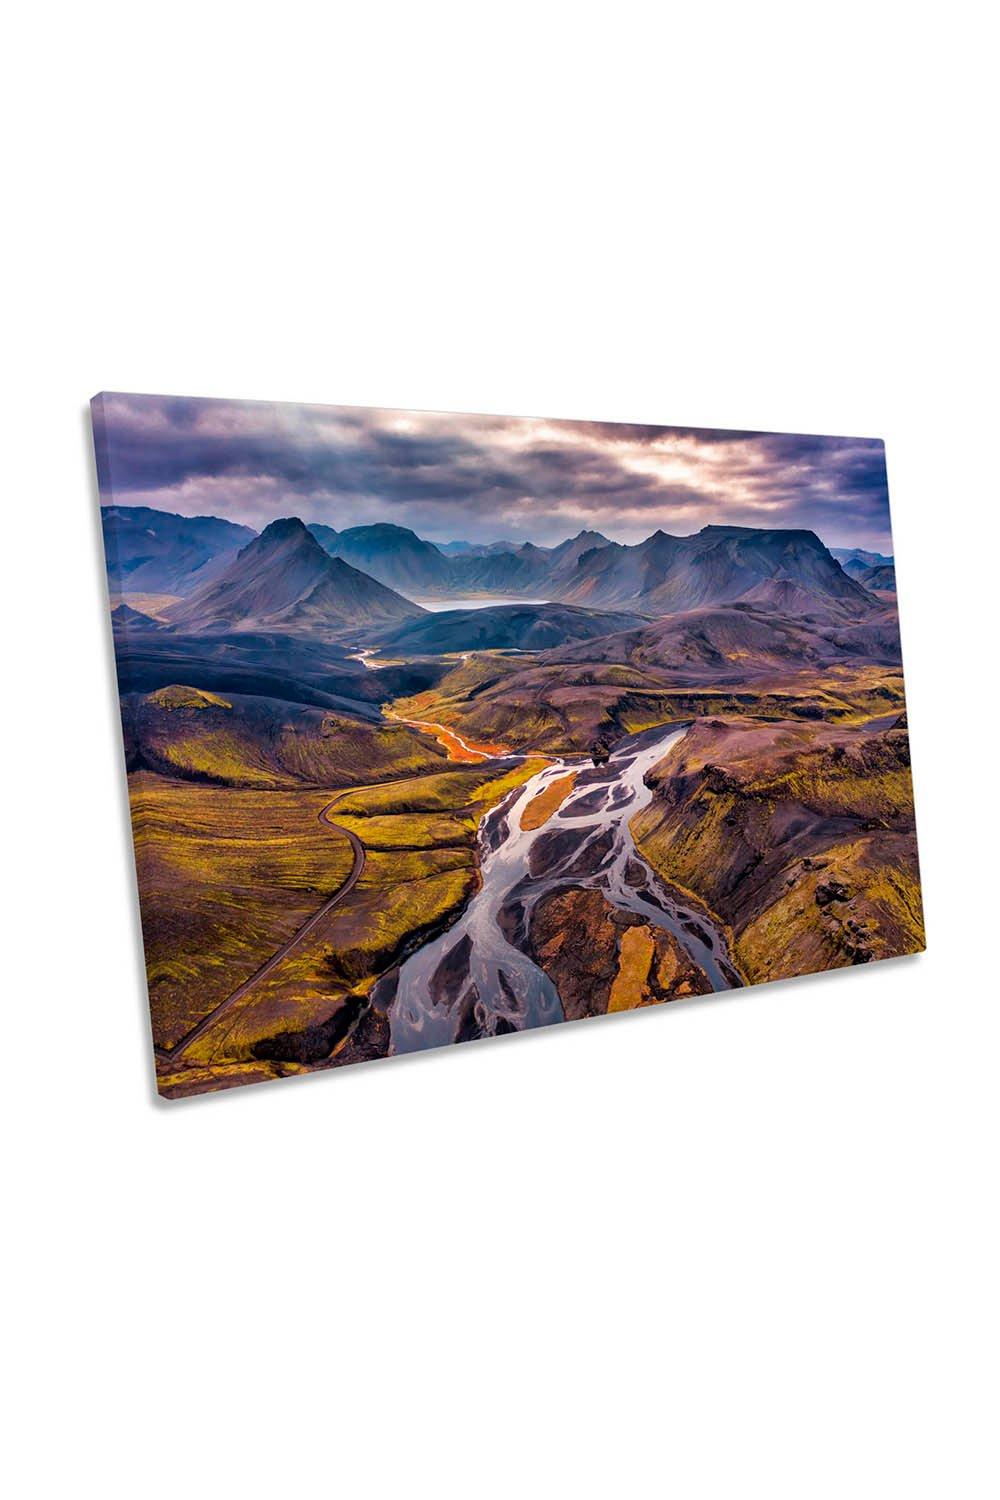 Over the Highland Mountains Iceland Canvas Wall Art Picture Print